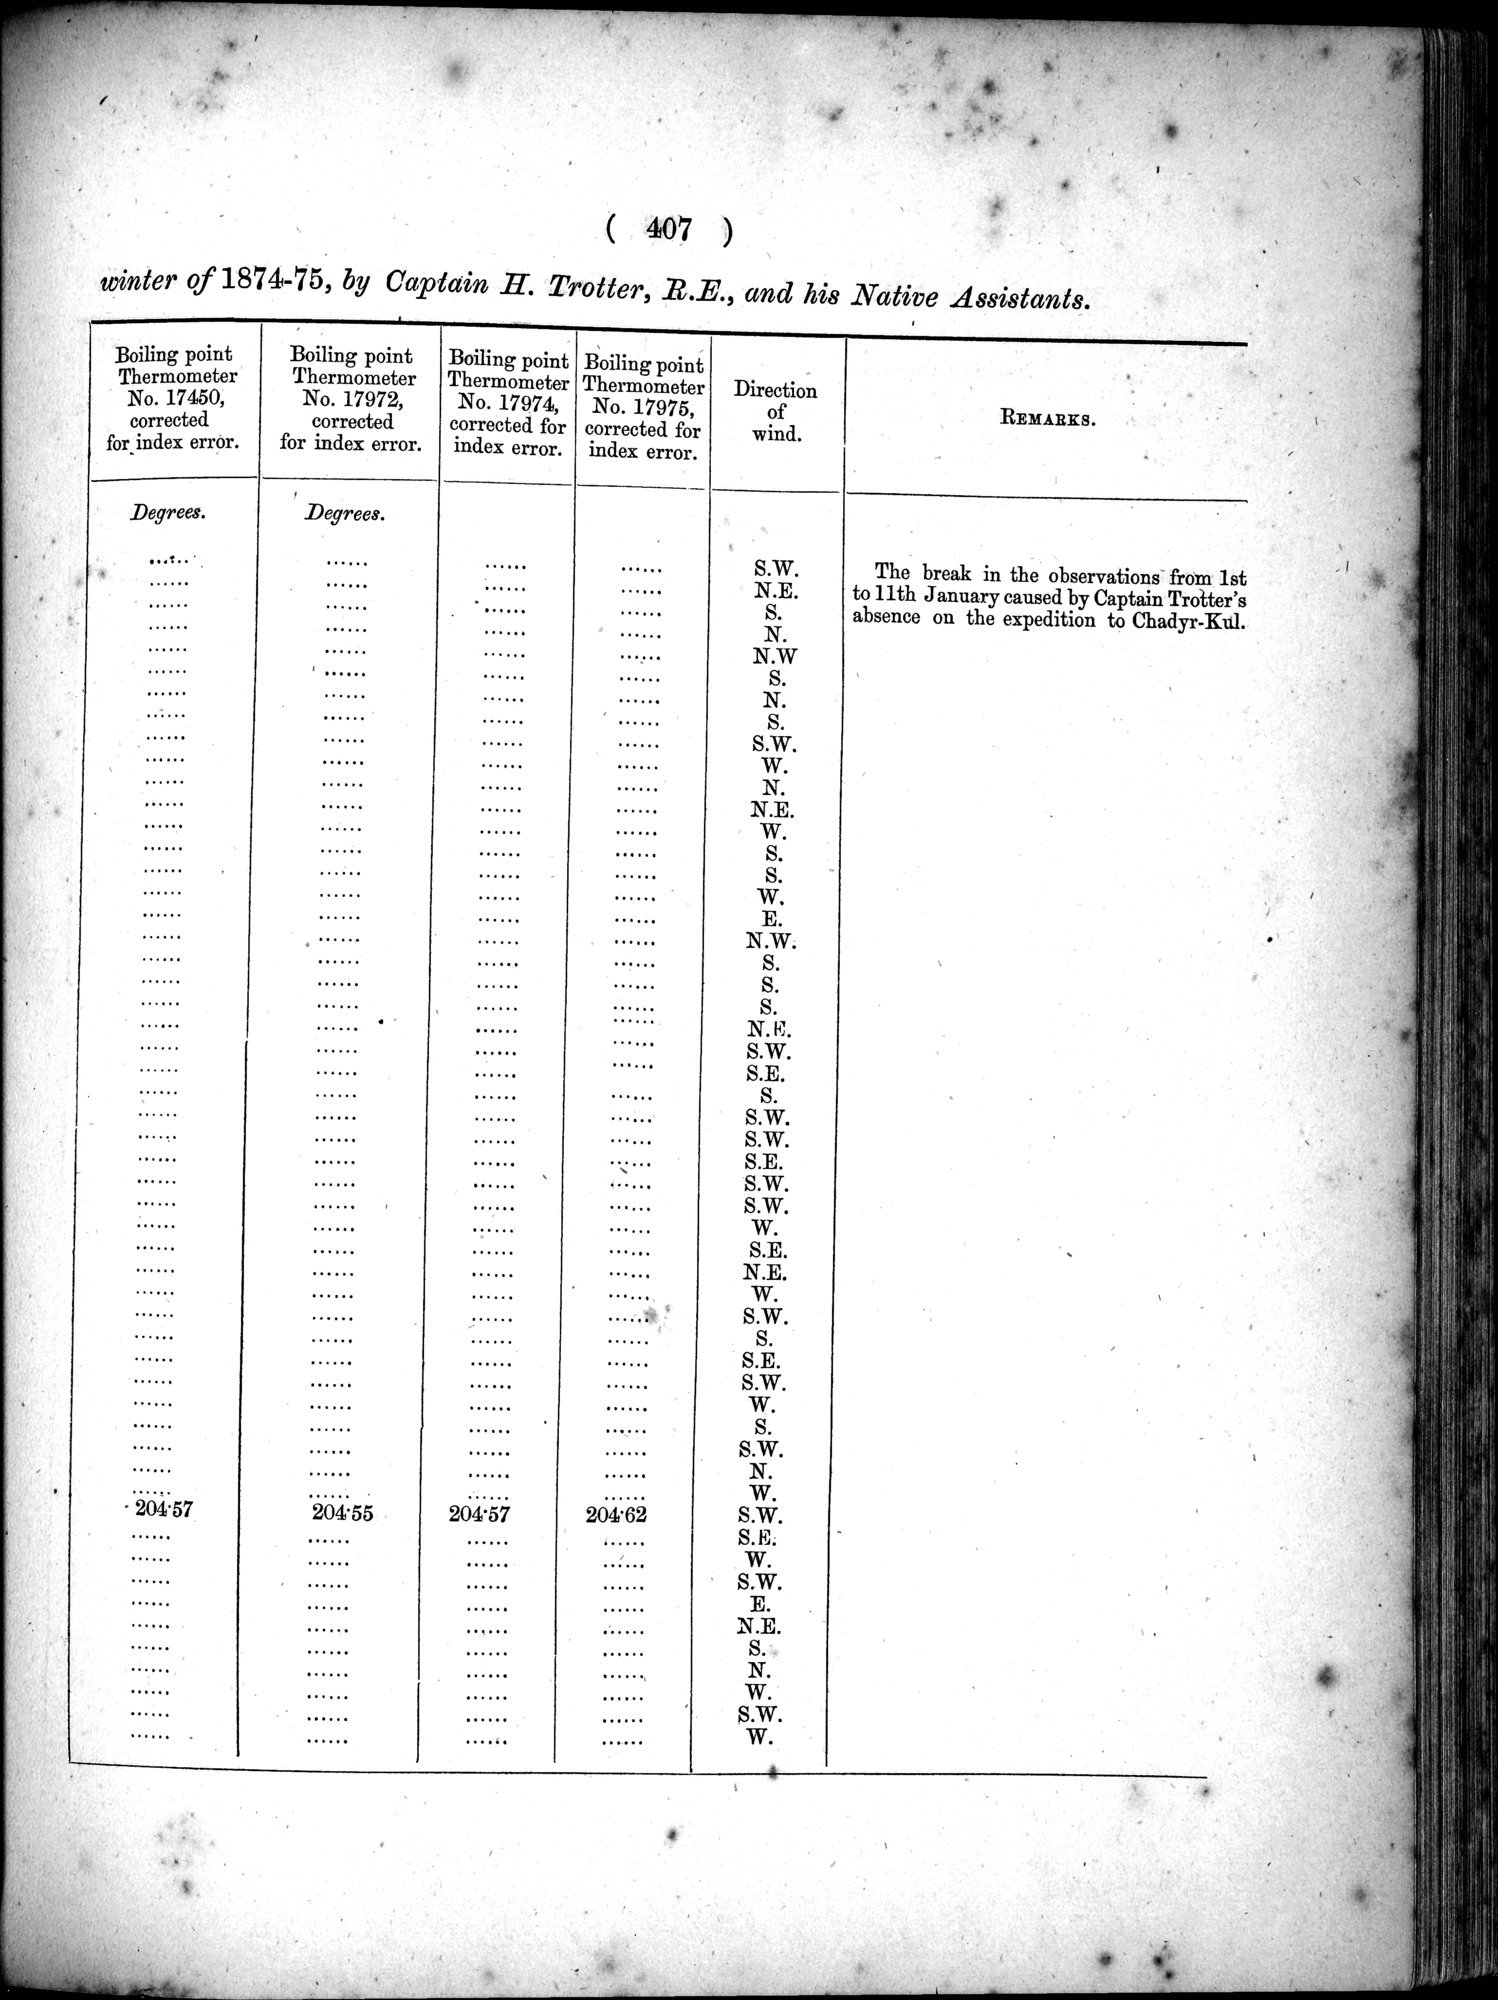 Report of a Mission to Yarkund in 1873 : vol.1 / Page 541 (Grayscale High Resolution Image)